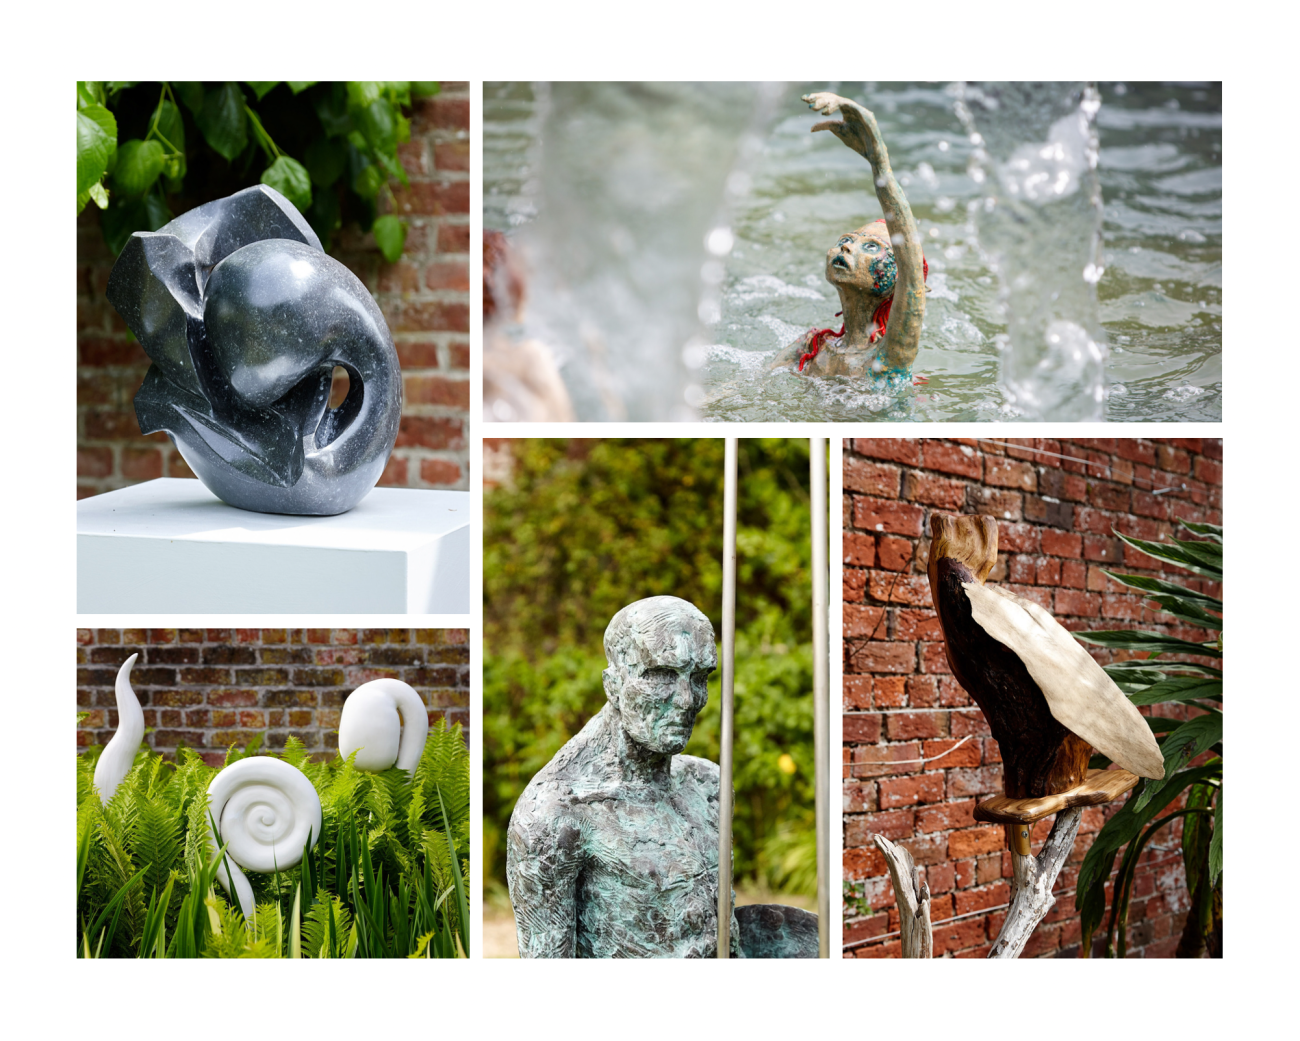 Selection of sculptures from previous ForM Sculpture Exhibitions